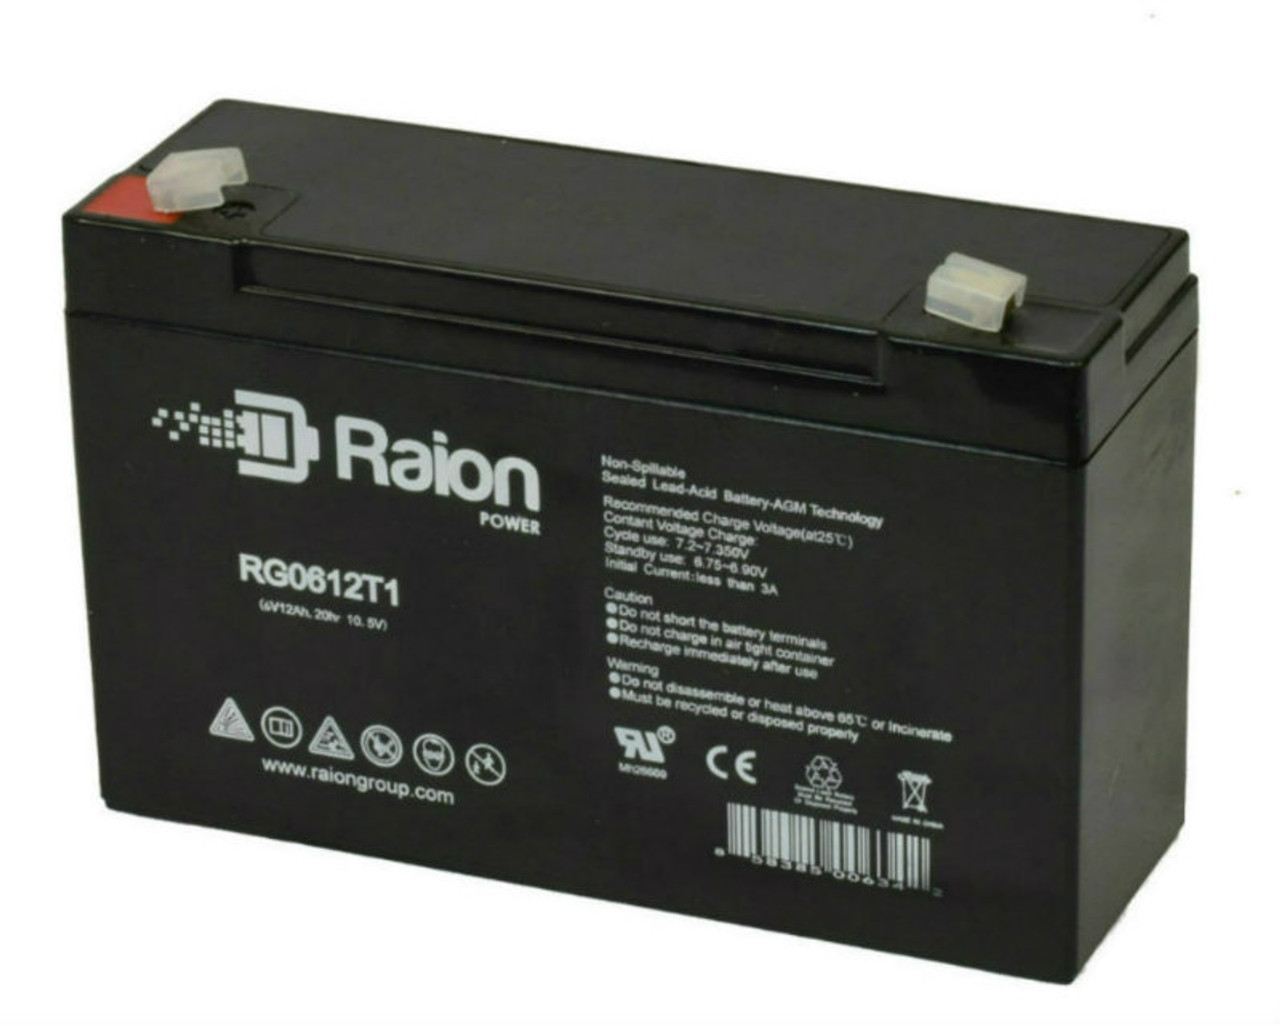 Raion Power RG06120T1 Replacement 6V 12Ah Emergency Light Battery for Edwards 1611